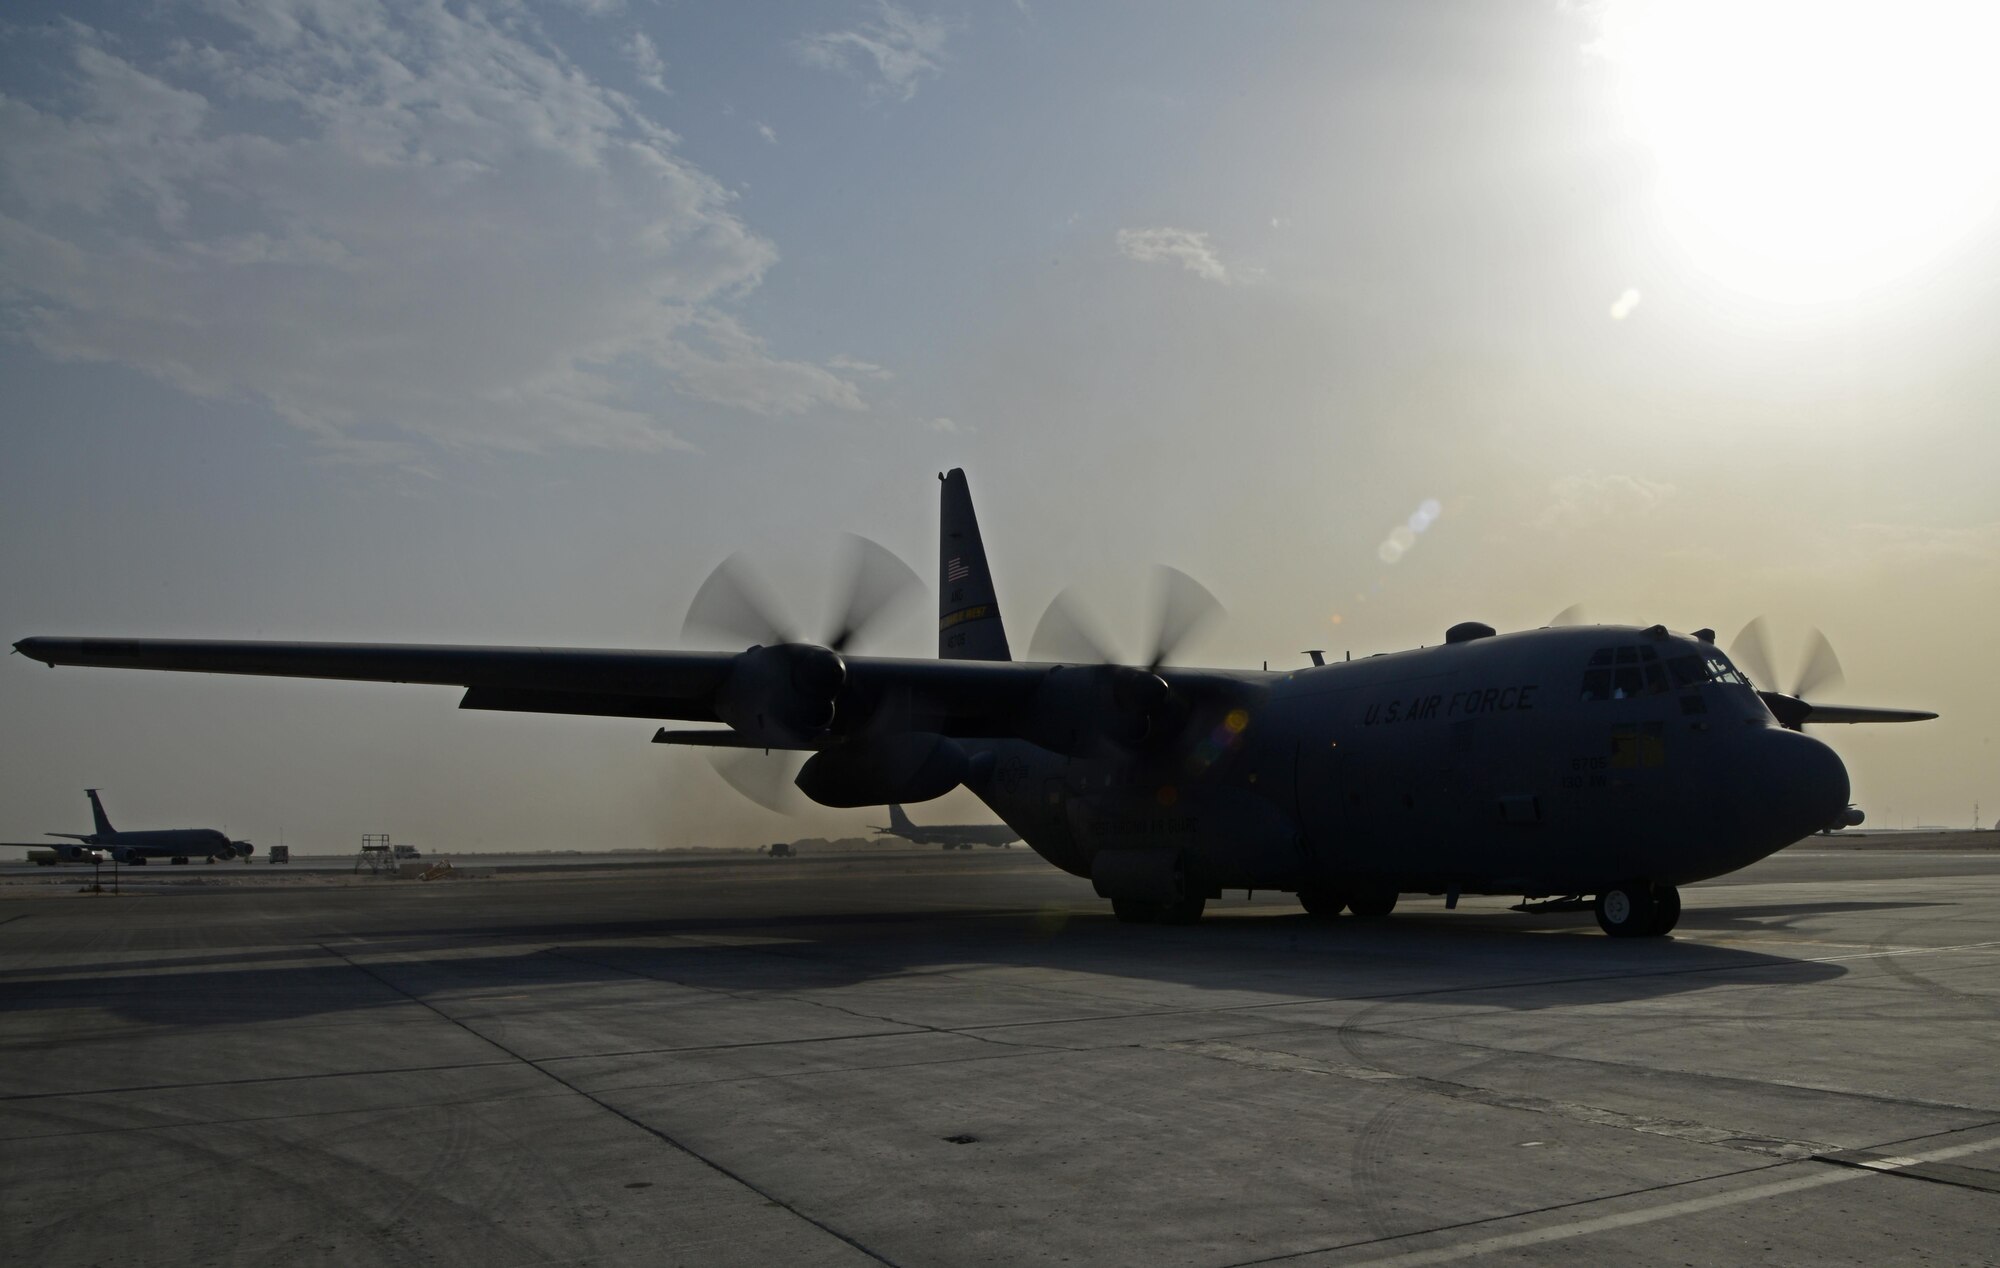 A C-130 Hercules prepares to taxi on the flightline, Feb. 18, 2015, at Al Udeid Air Base, Qatar. Before each mission, maintainers from the 746th Expeditionary Aircraft Maintenance Unit perform a preflight inspection inside and outside of the C-130 to ensure all systems are working in accordance with the job guides. Pre-flight inspections are good for up to 72 hours prior to the aircraft's scheduled departure. (U.S. Air Force photo by Senior Airman Kia Atkins)